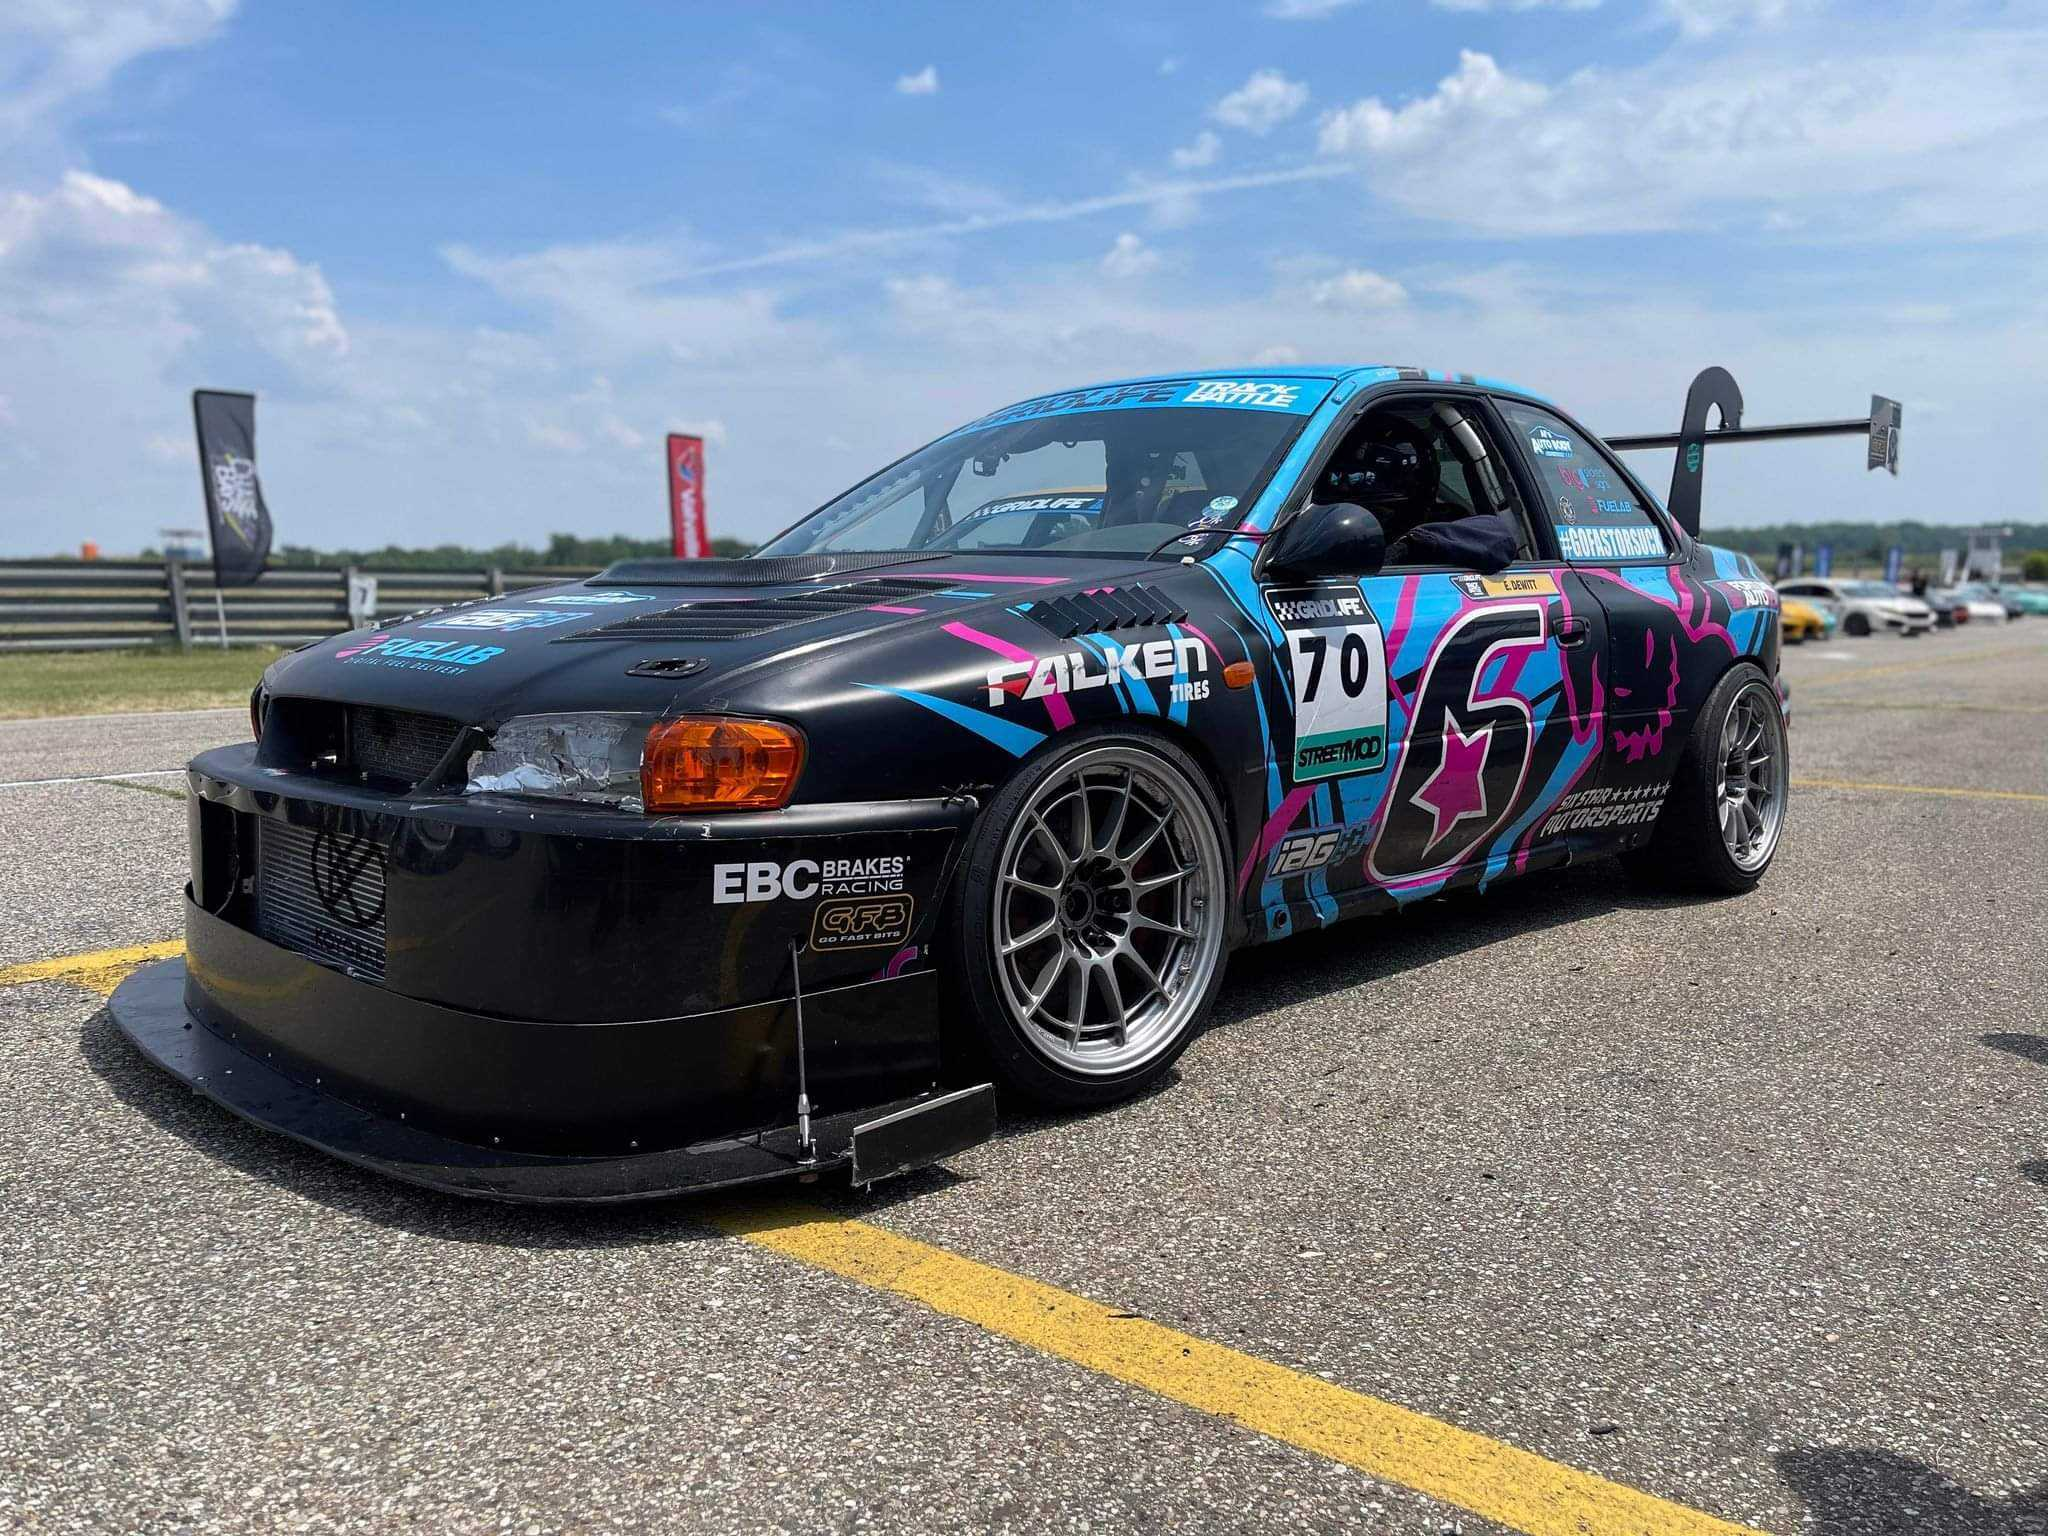 SR-21-Equipped Time Attack Racer Obtains Class Win at Gridlife Midwest